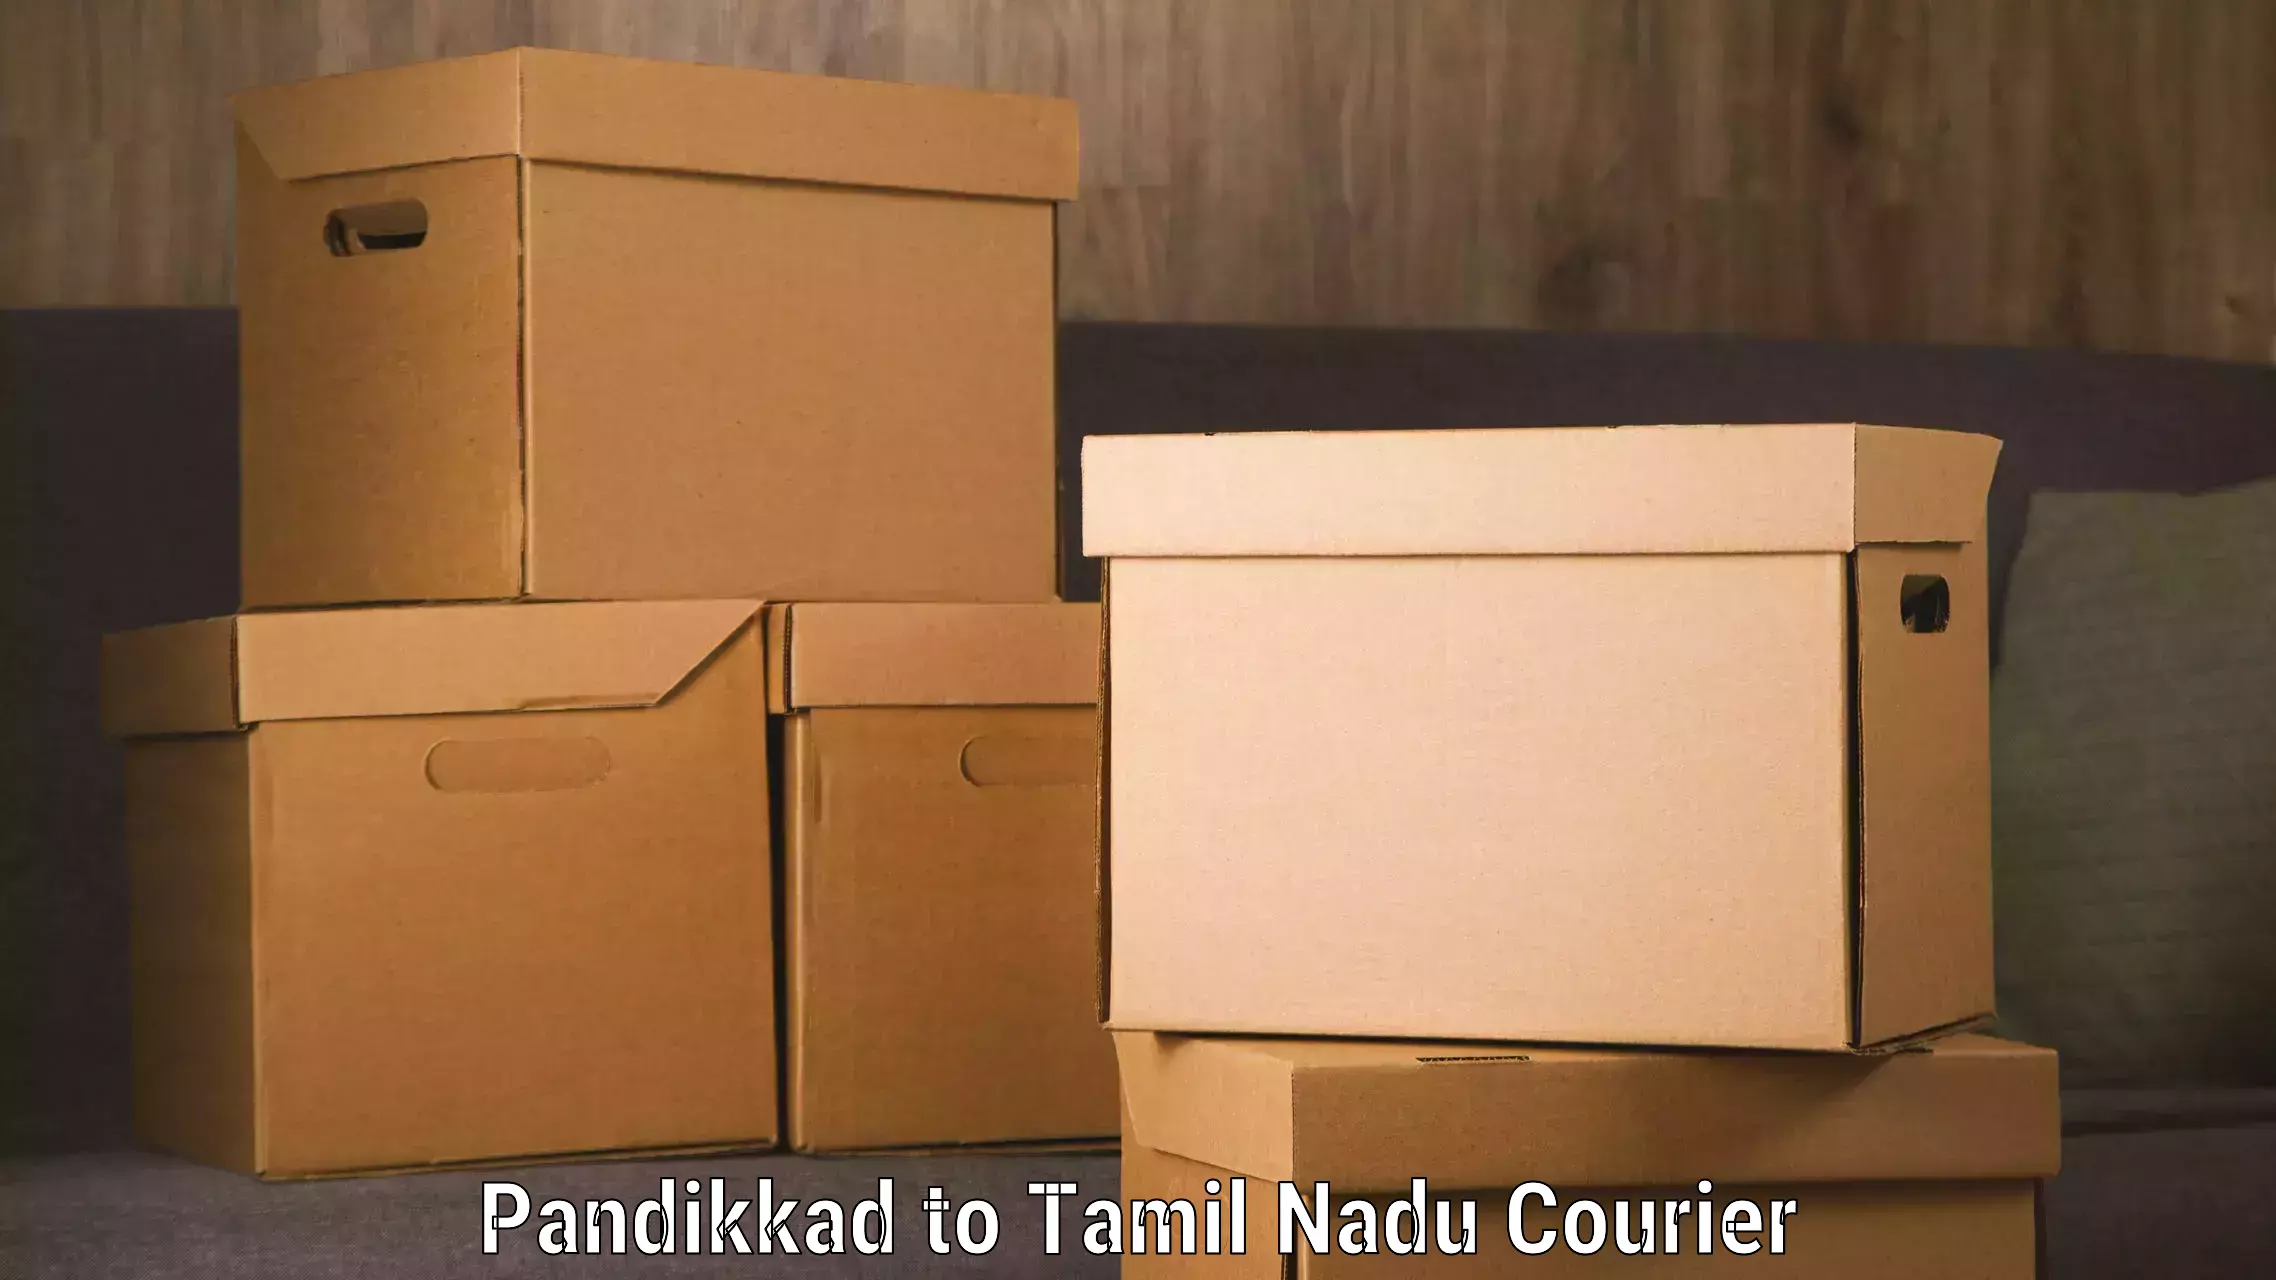 Reliable parcel services Pandikkad to Ennore Port Chennai